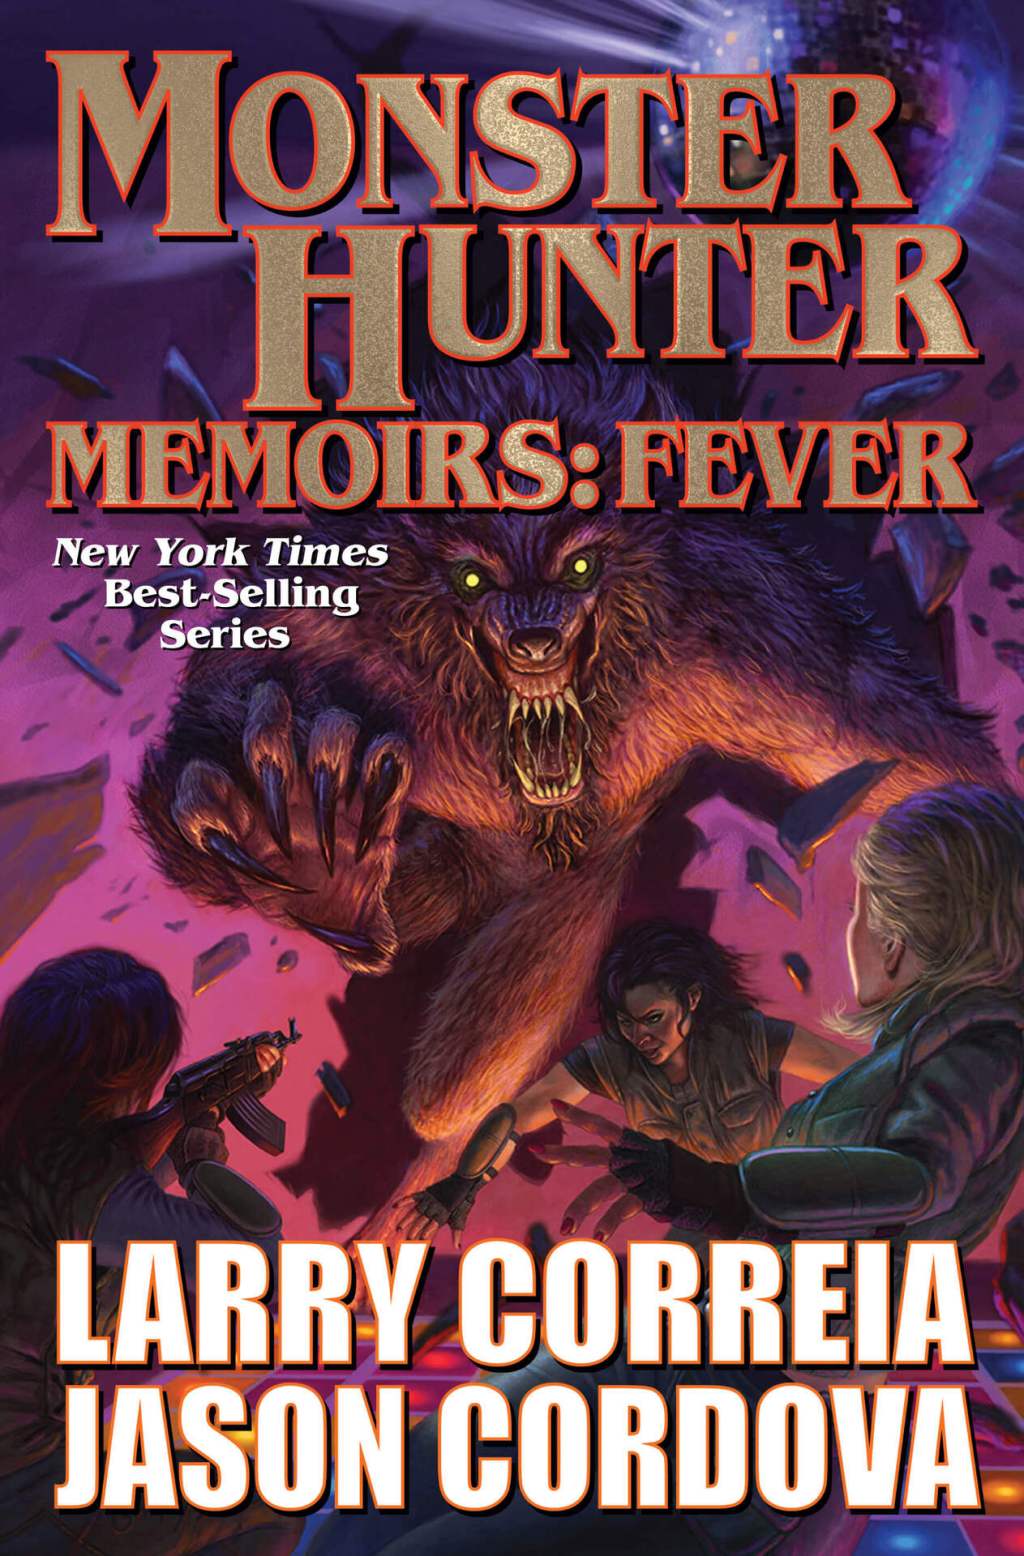 Fever – Another great Monster Hunter Memoirs book.